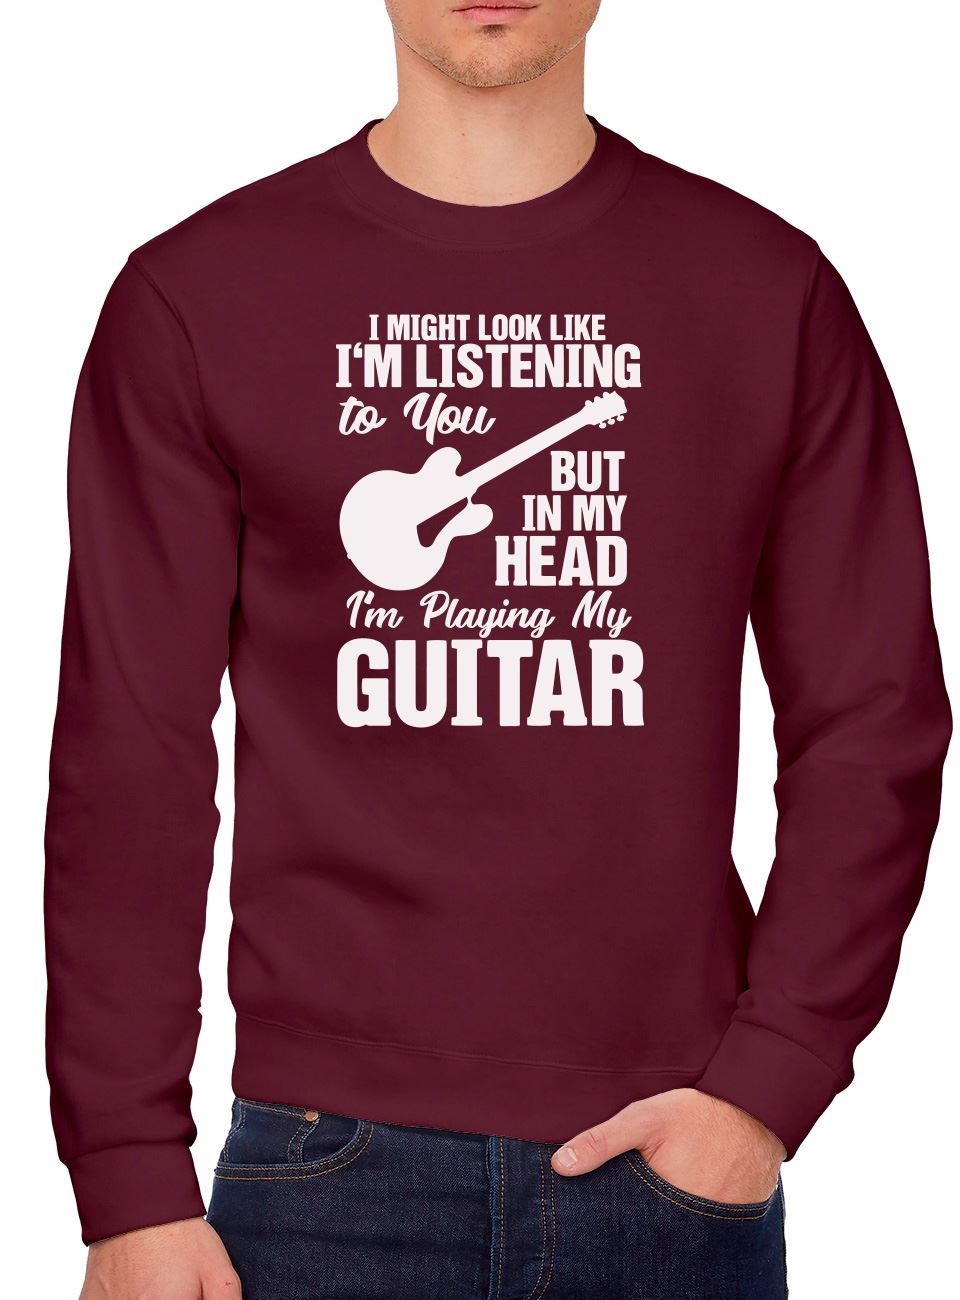 I Might Look Like I'm Listening To You But In My Head I'm Playing My Guitar - Youth & Mens Sweatshirt